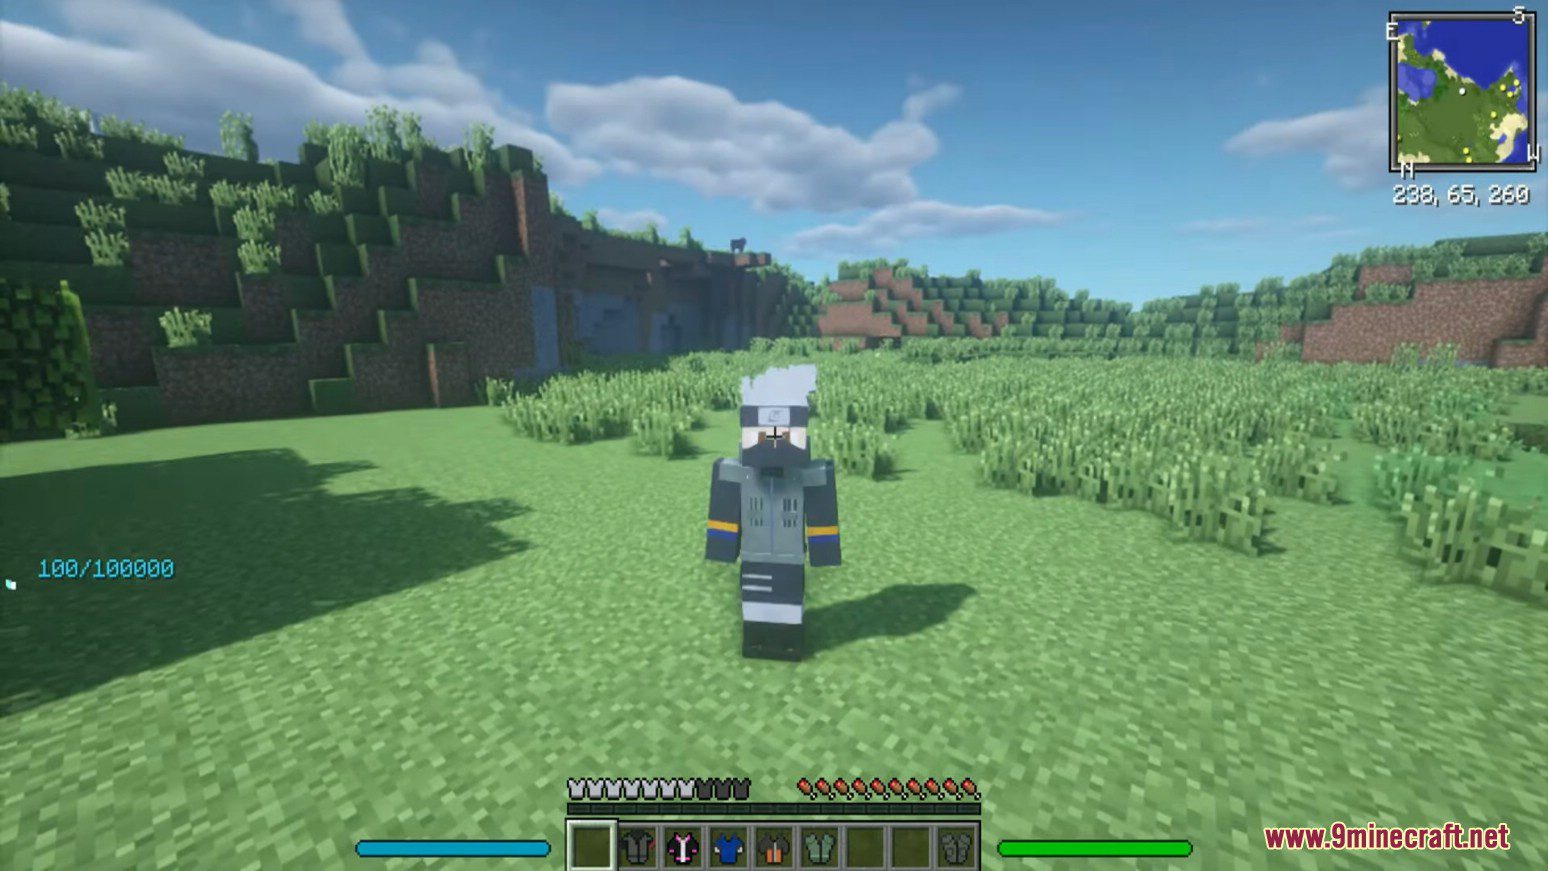 Naruto All Mods Plus Modpack (1.7.10) - Fight as A Ninja with Technics 5